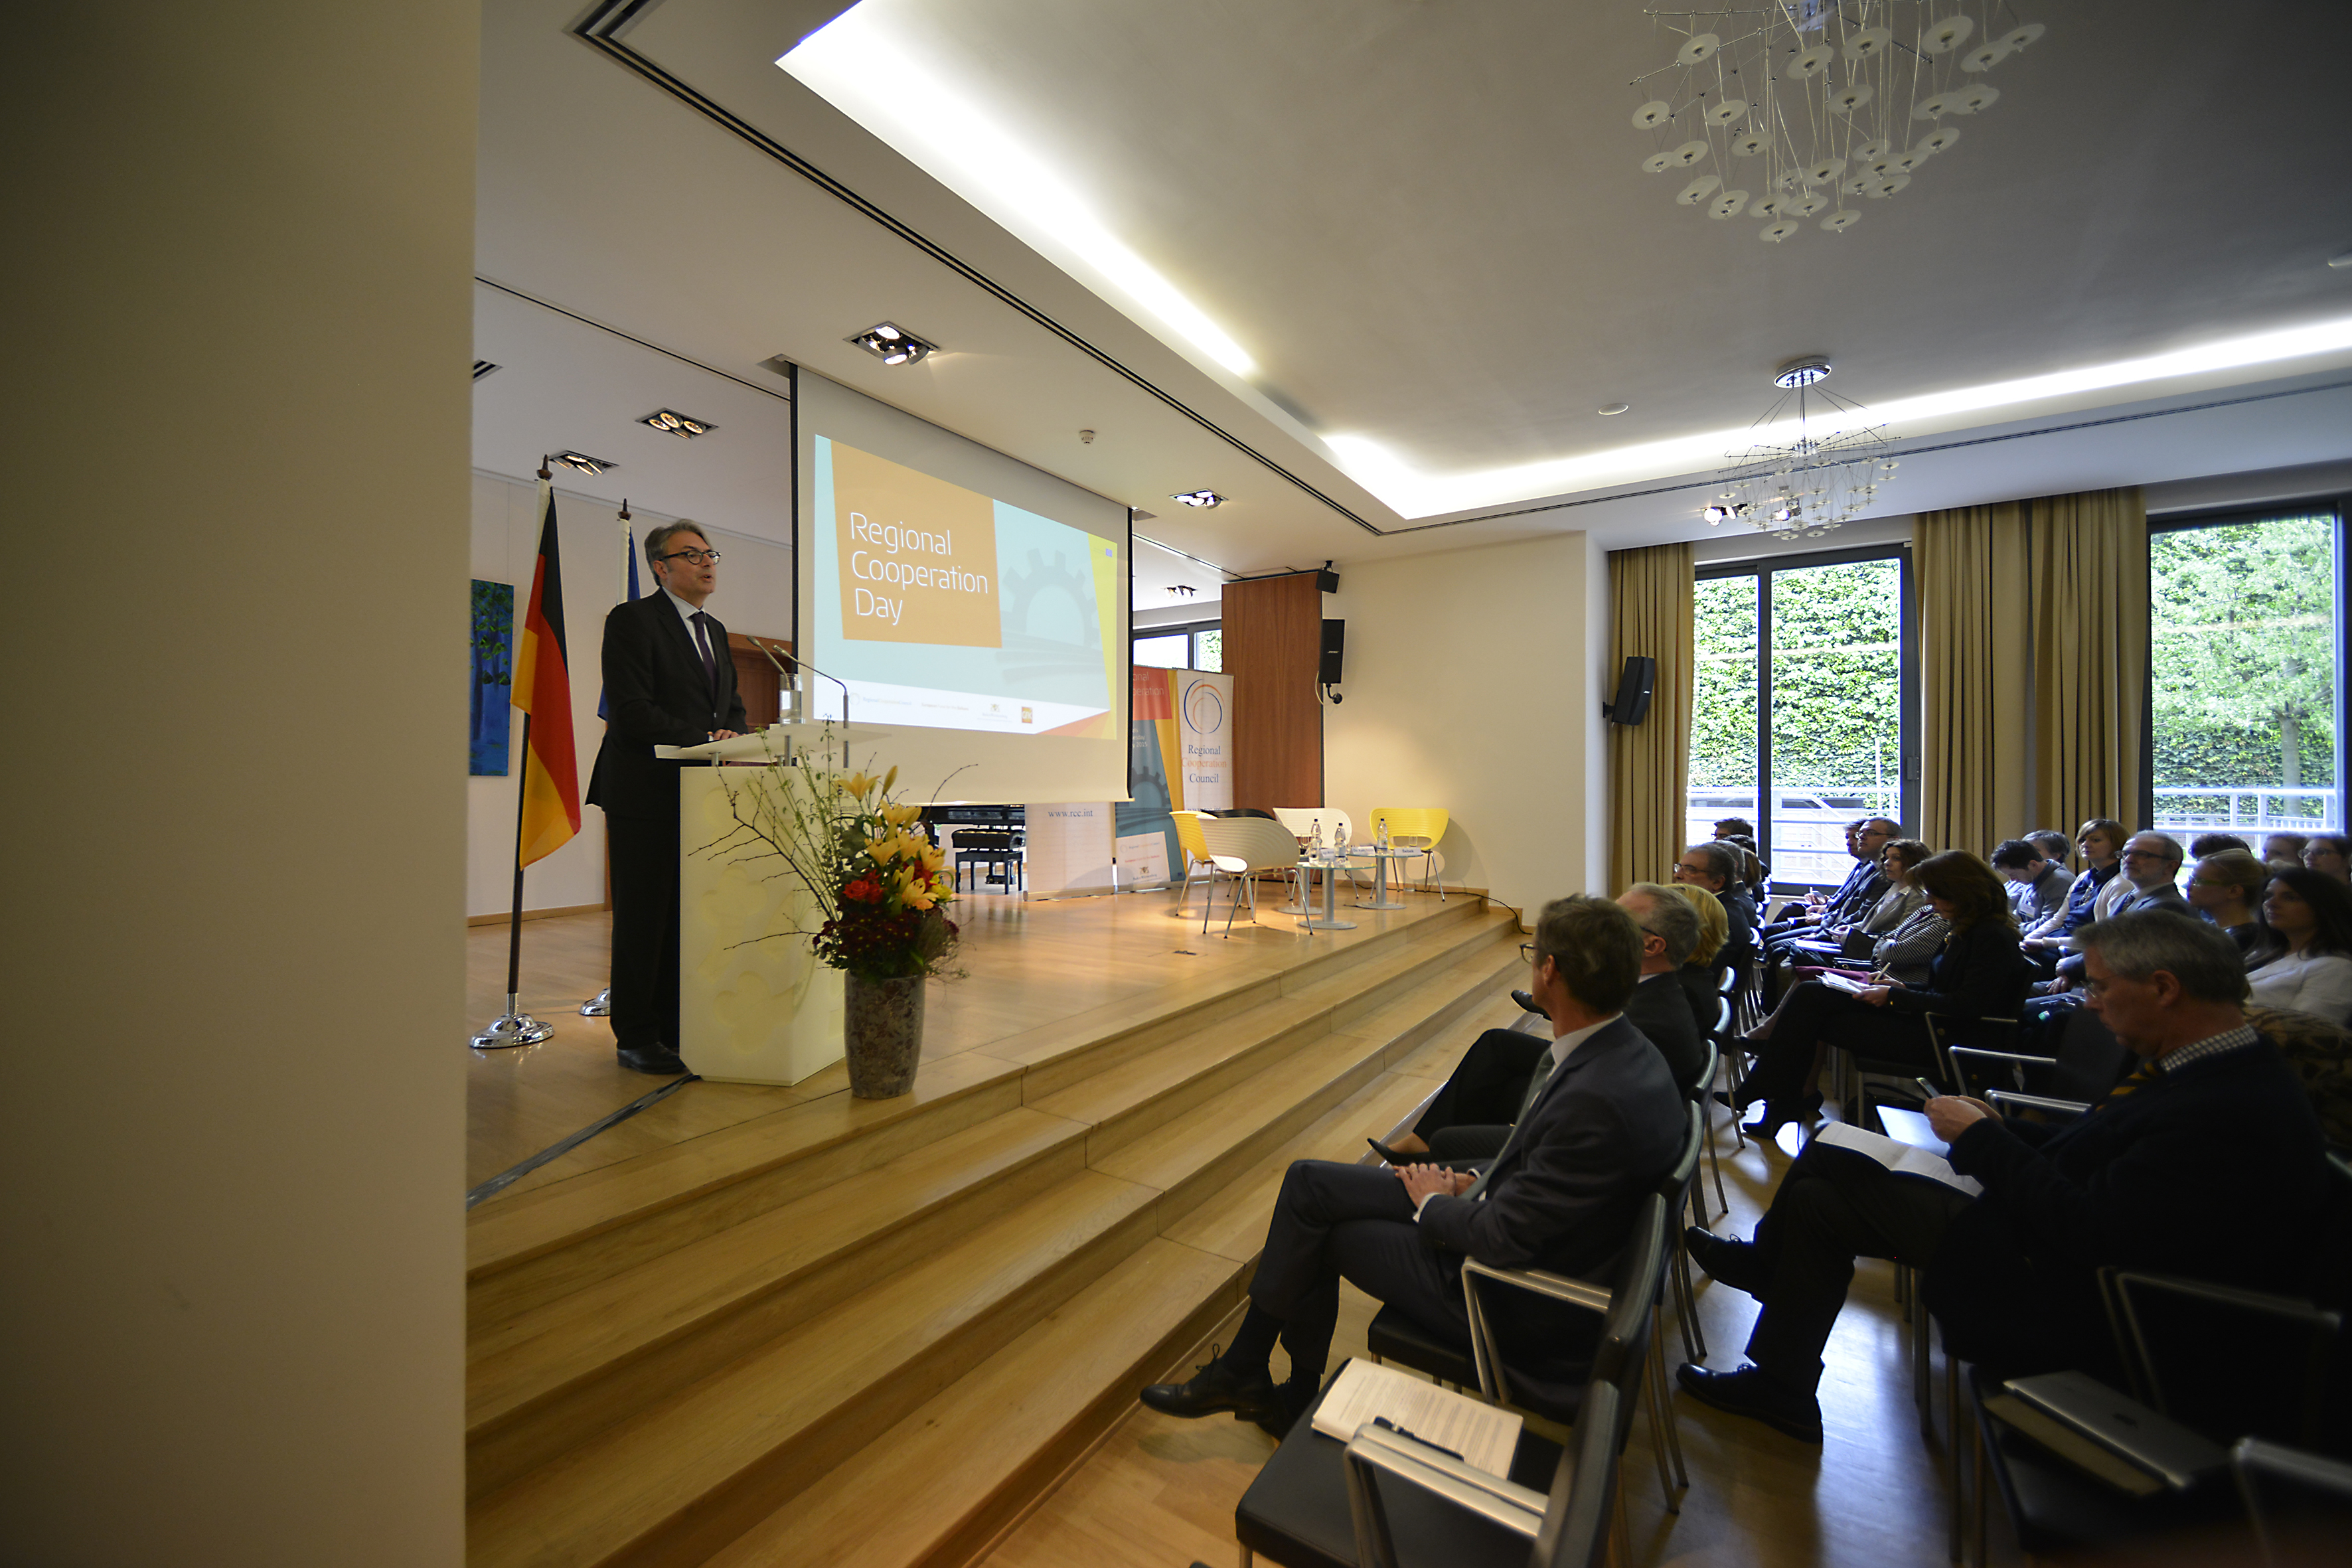  Brussels hosts Regional Cooperation Day, dedicated to South East Europe, on 6 May 2015. (Photo: RCC/Jos L. Knaepen)